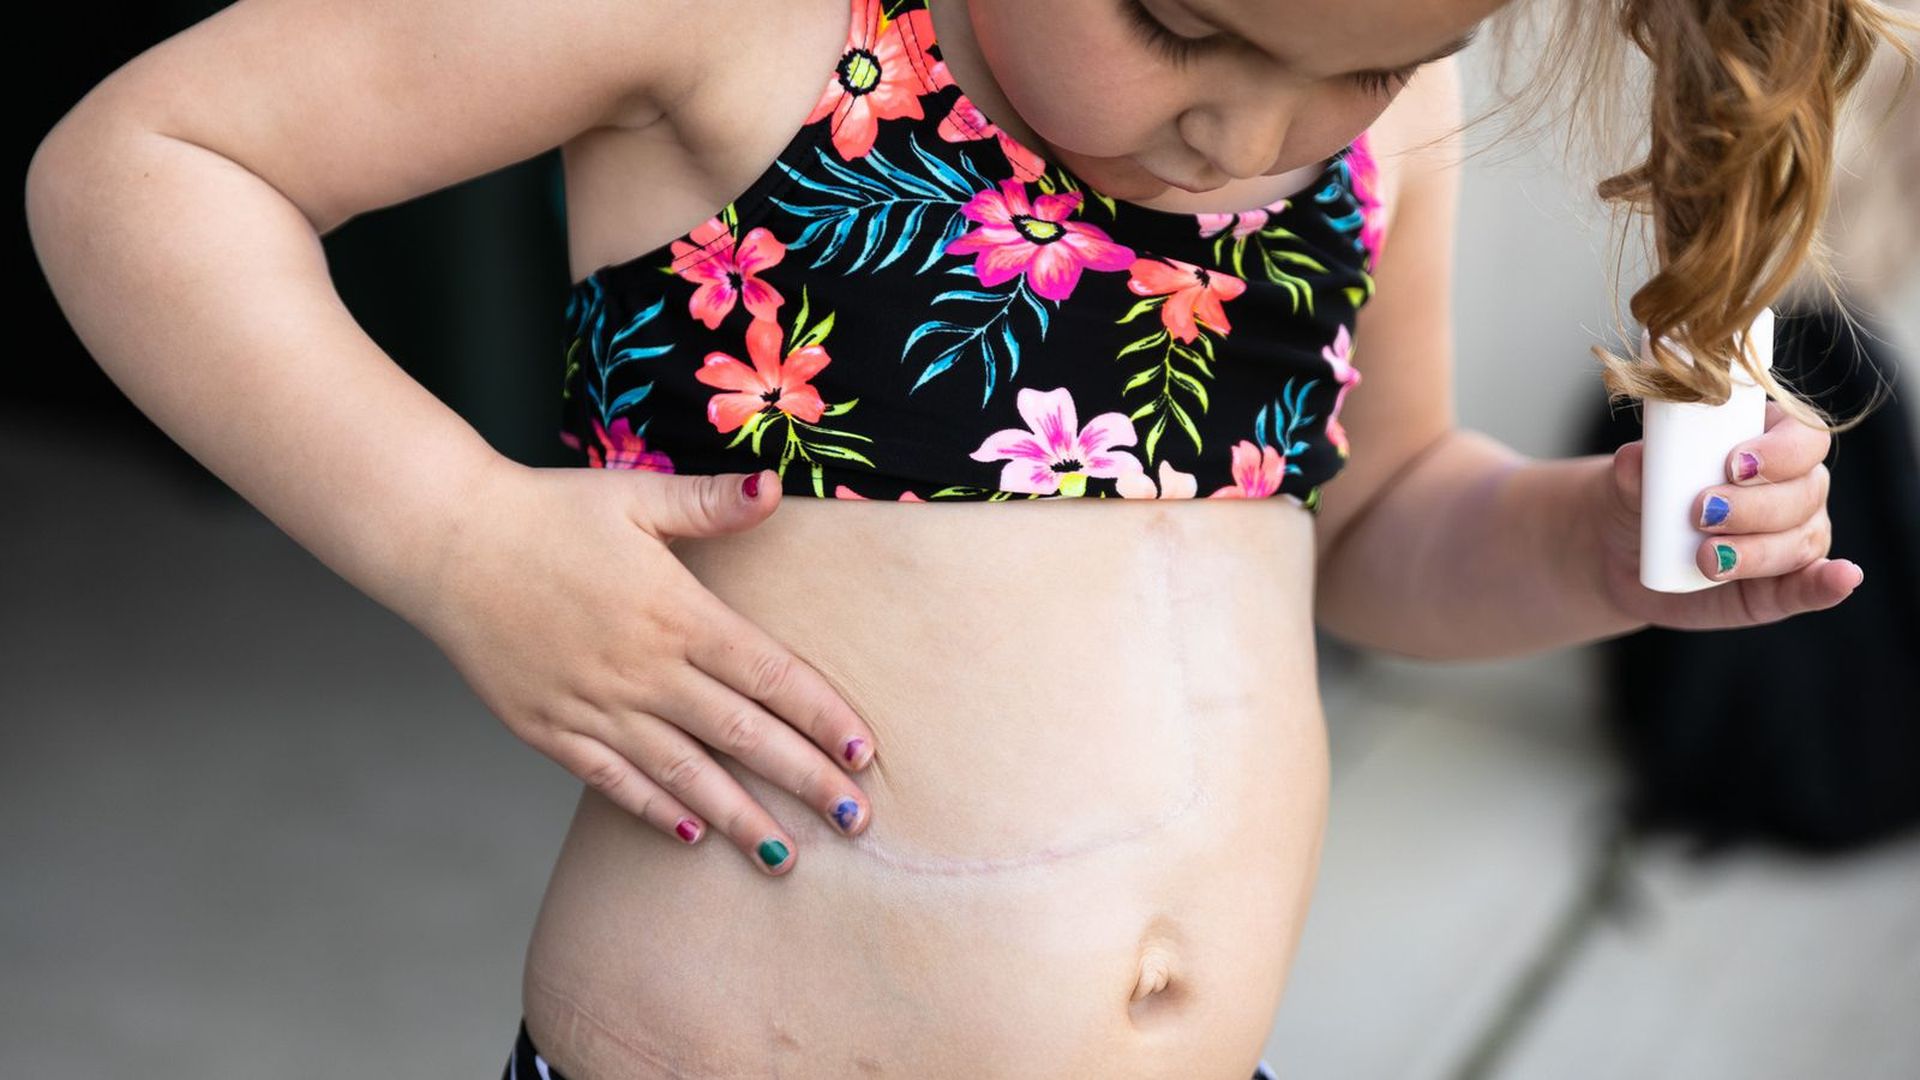 A girl rubs sunscreen on her liver transplant scar.